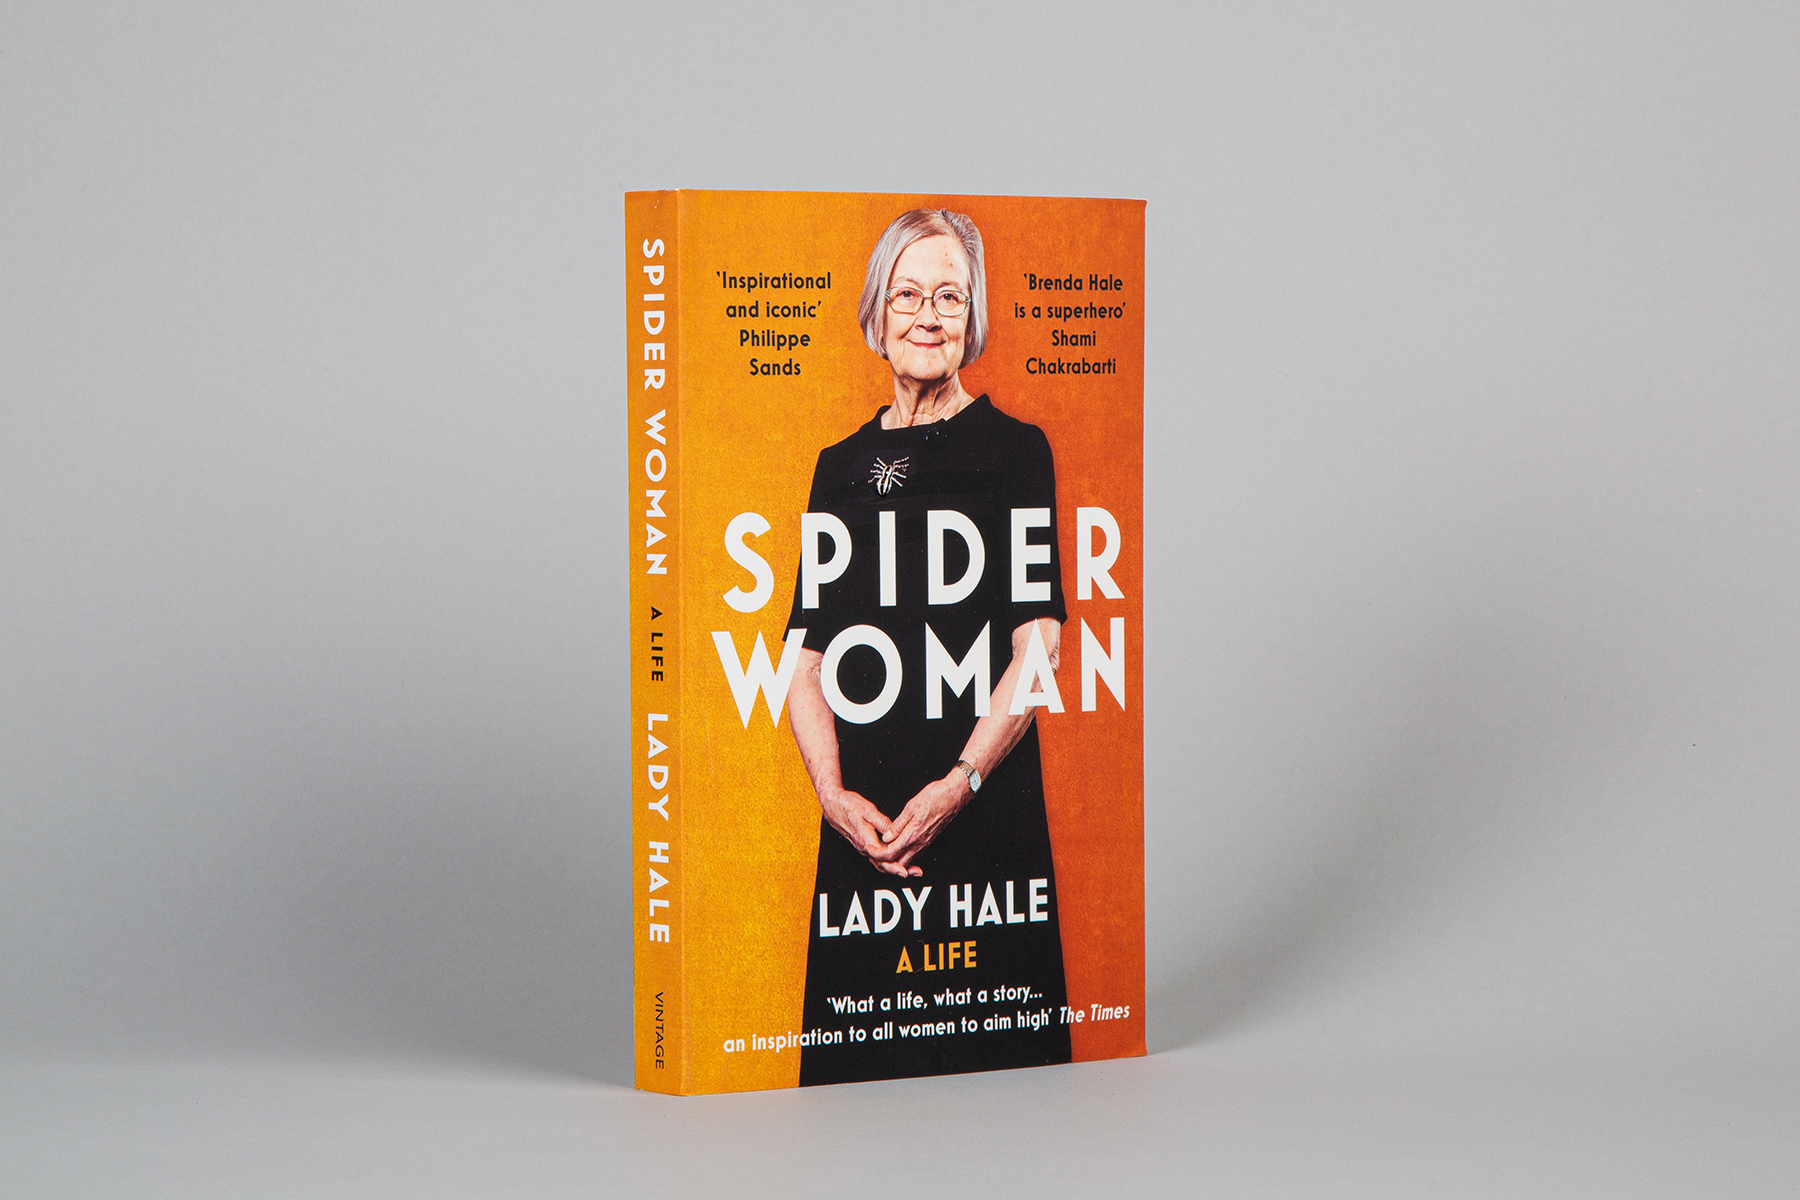 Book, Spider Woman by Lady Hale, standing upright at a slight angle against a grey backdrop.